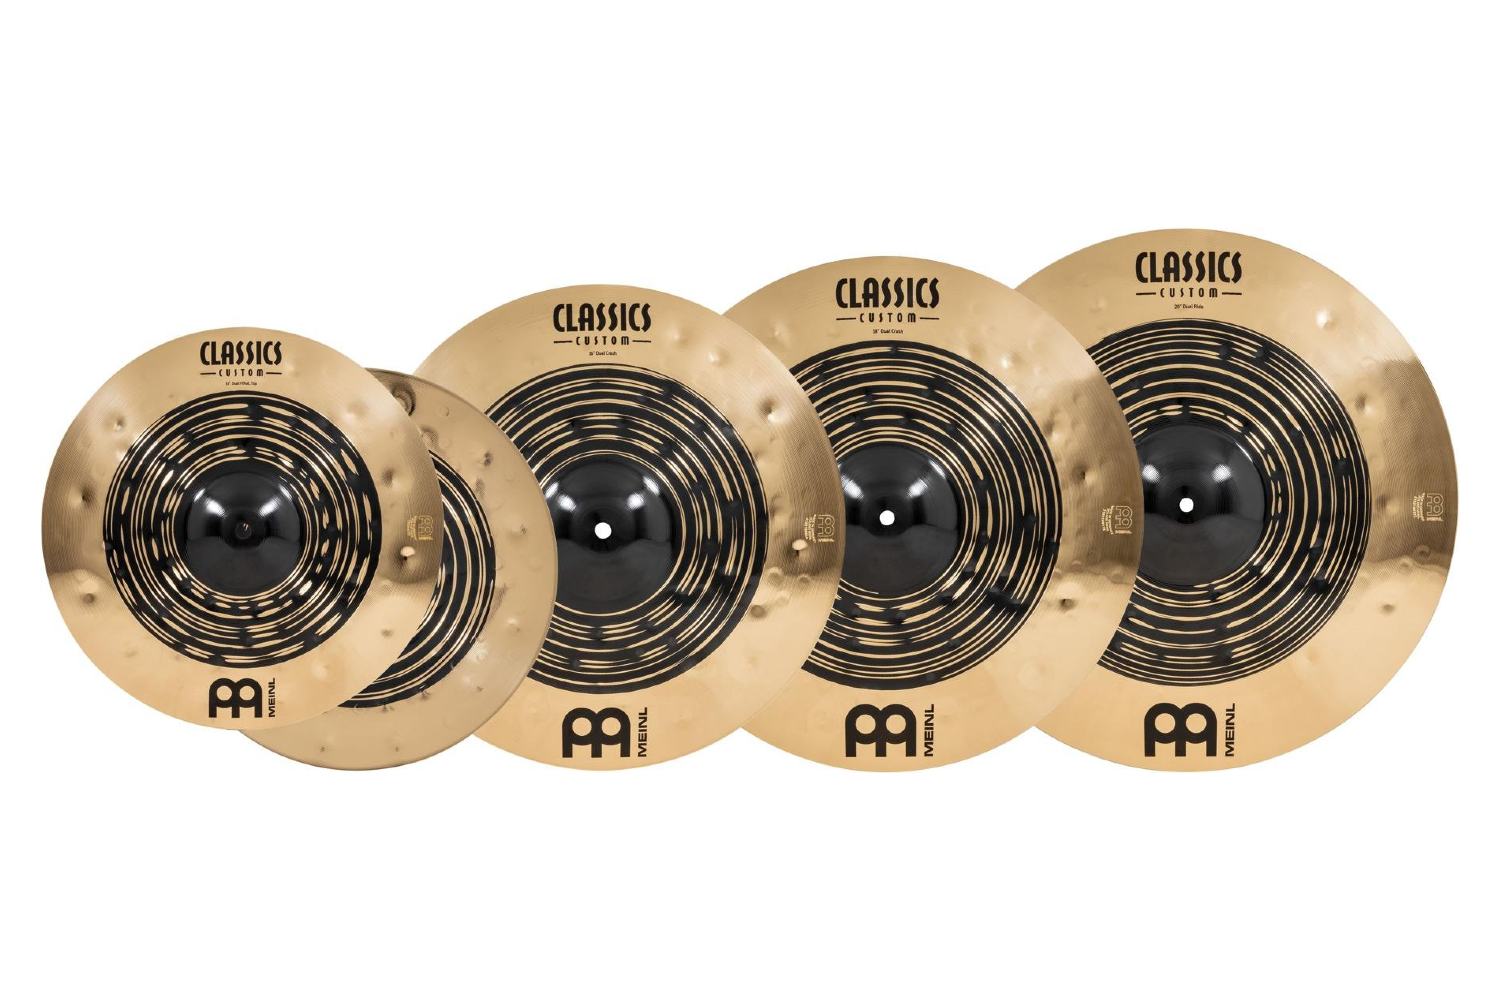 meinl cymbal review